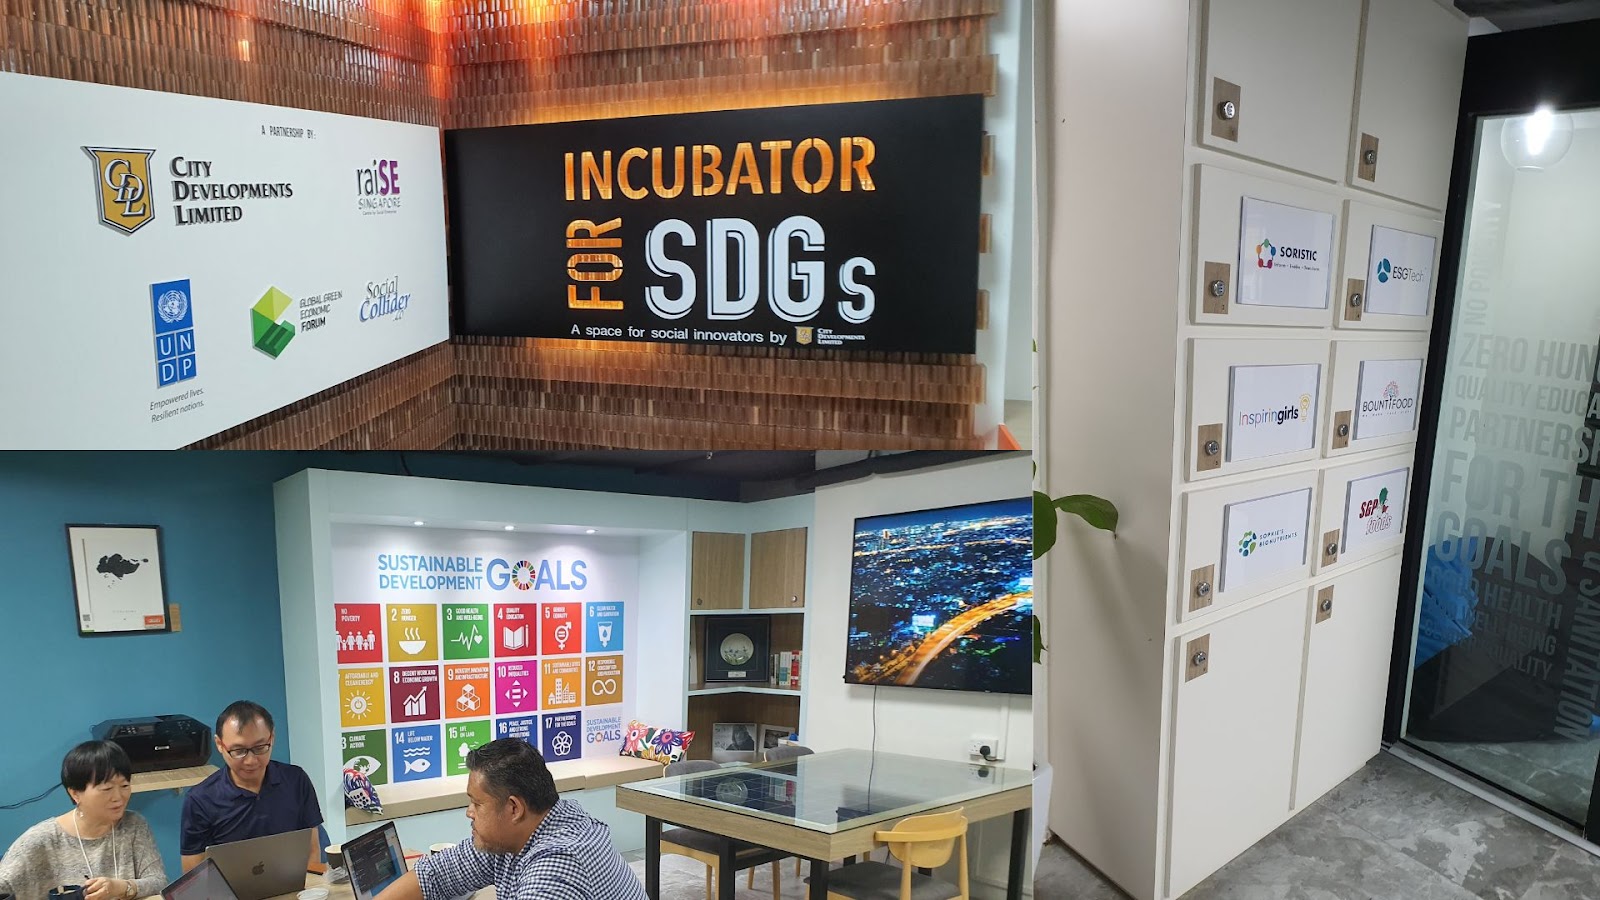 Visit to City Developments Limited - Incubator Space for SDGs